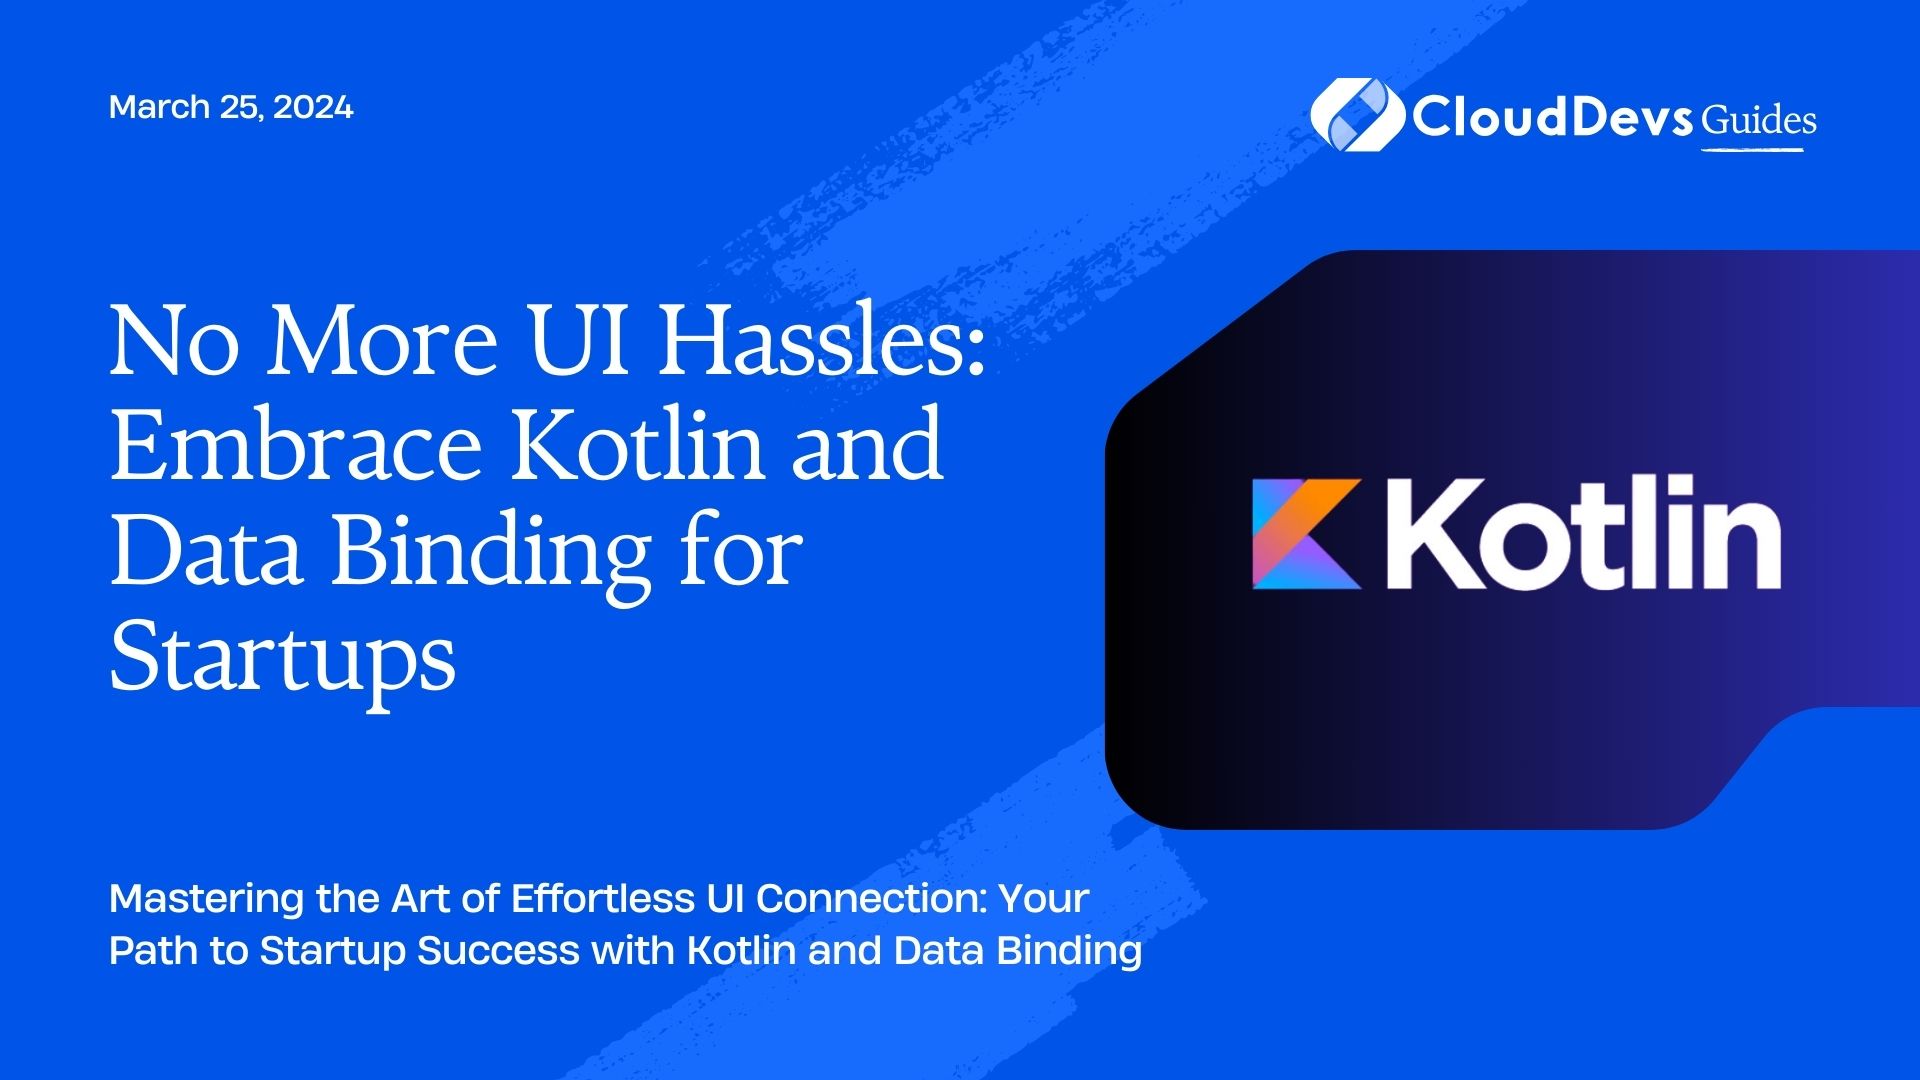 No More UI Hassles: Embrace Kotlin and Data Binding for Startups